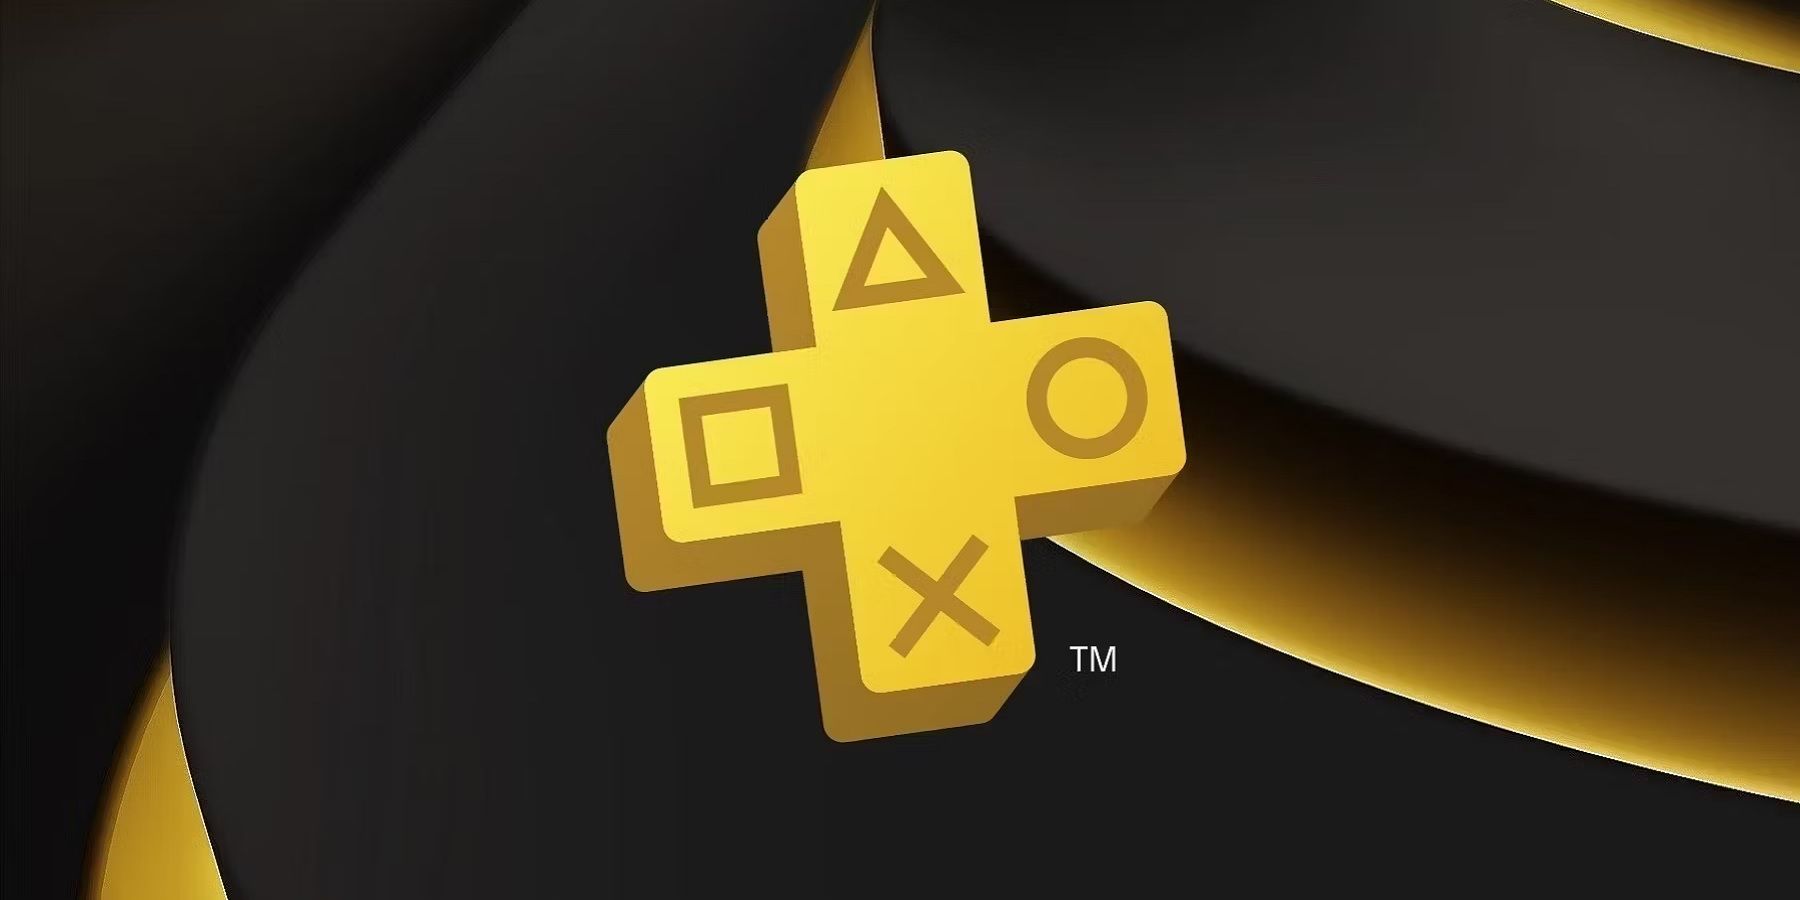 PlayStation Plus Extra and Premium October 2023 Games Lineup Revealed